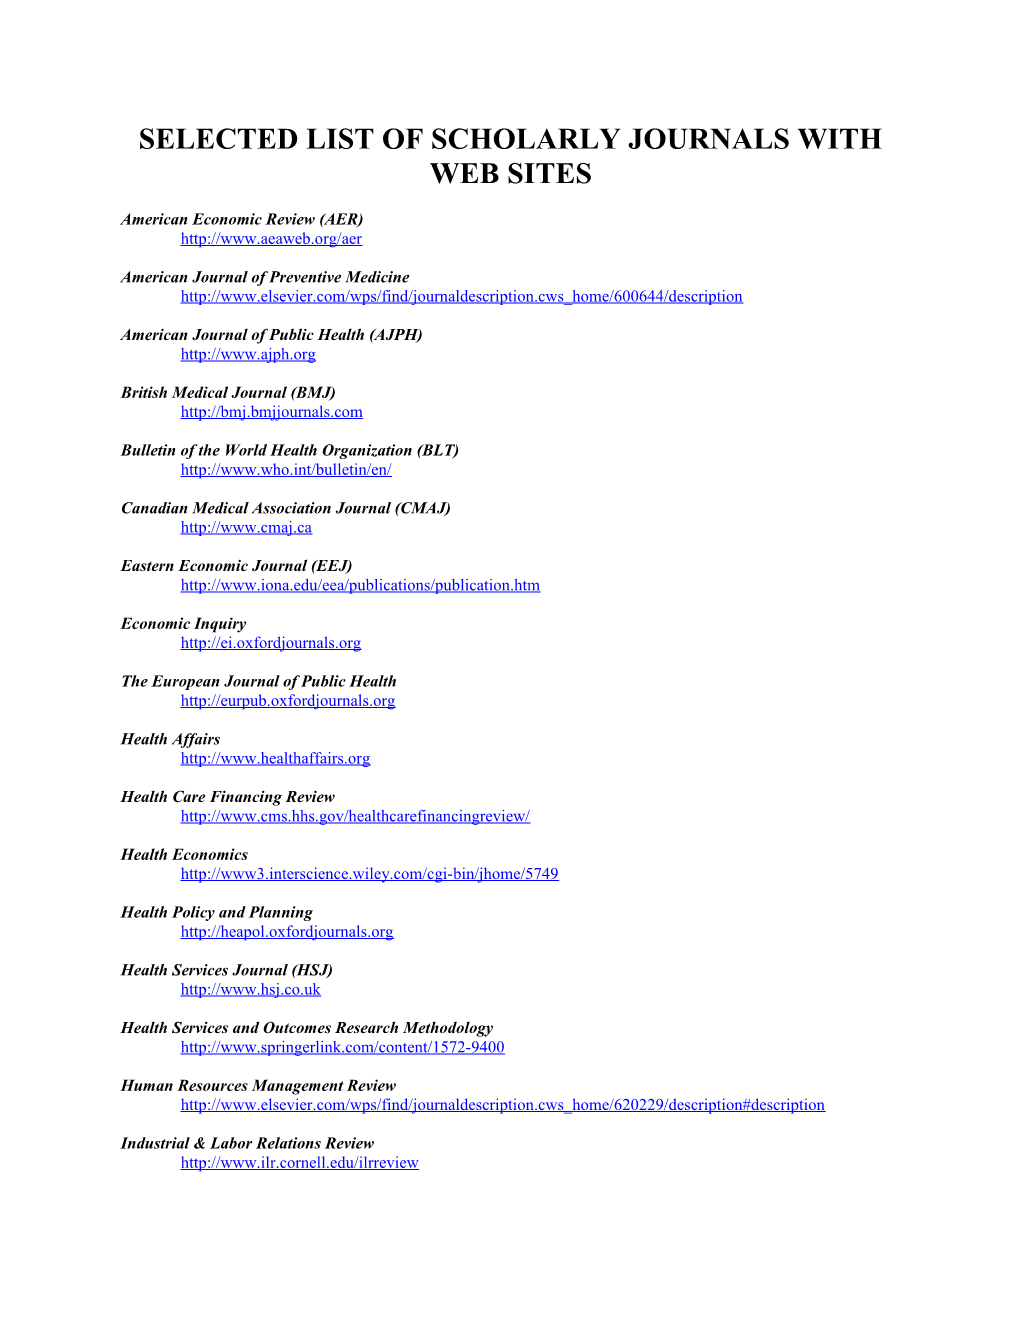 Selected List of Scholarly Journals with Web Sites